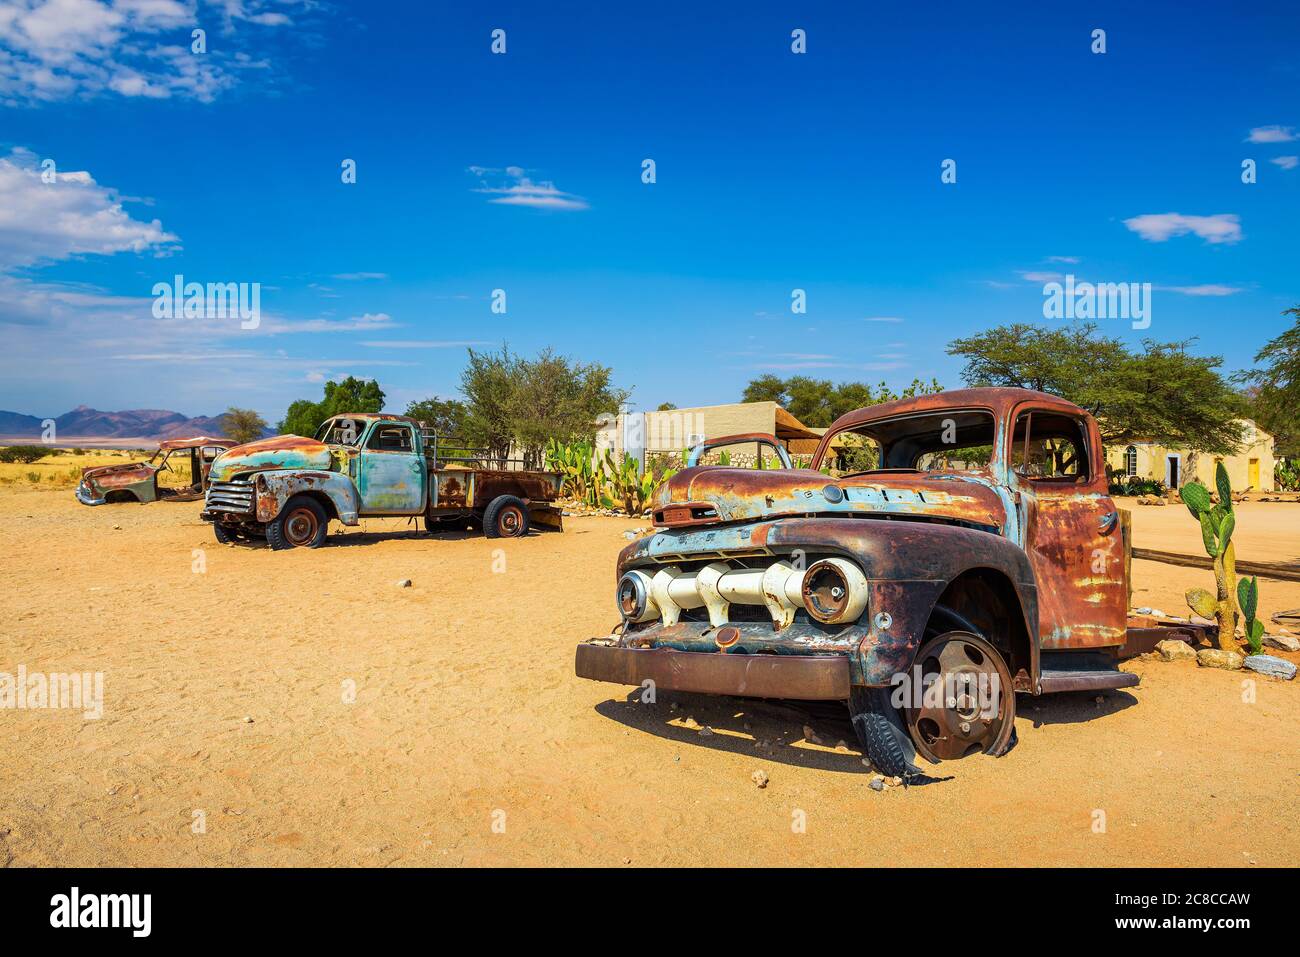 Solitaire, Namibia - March 29, 2019 : Abandoned car wrecks near the Solitaire service station located in the Namib Desert of Namibia. Stock Photo